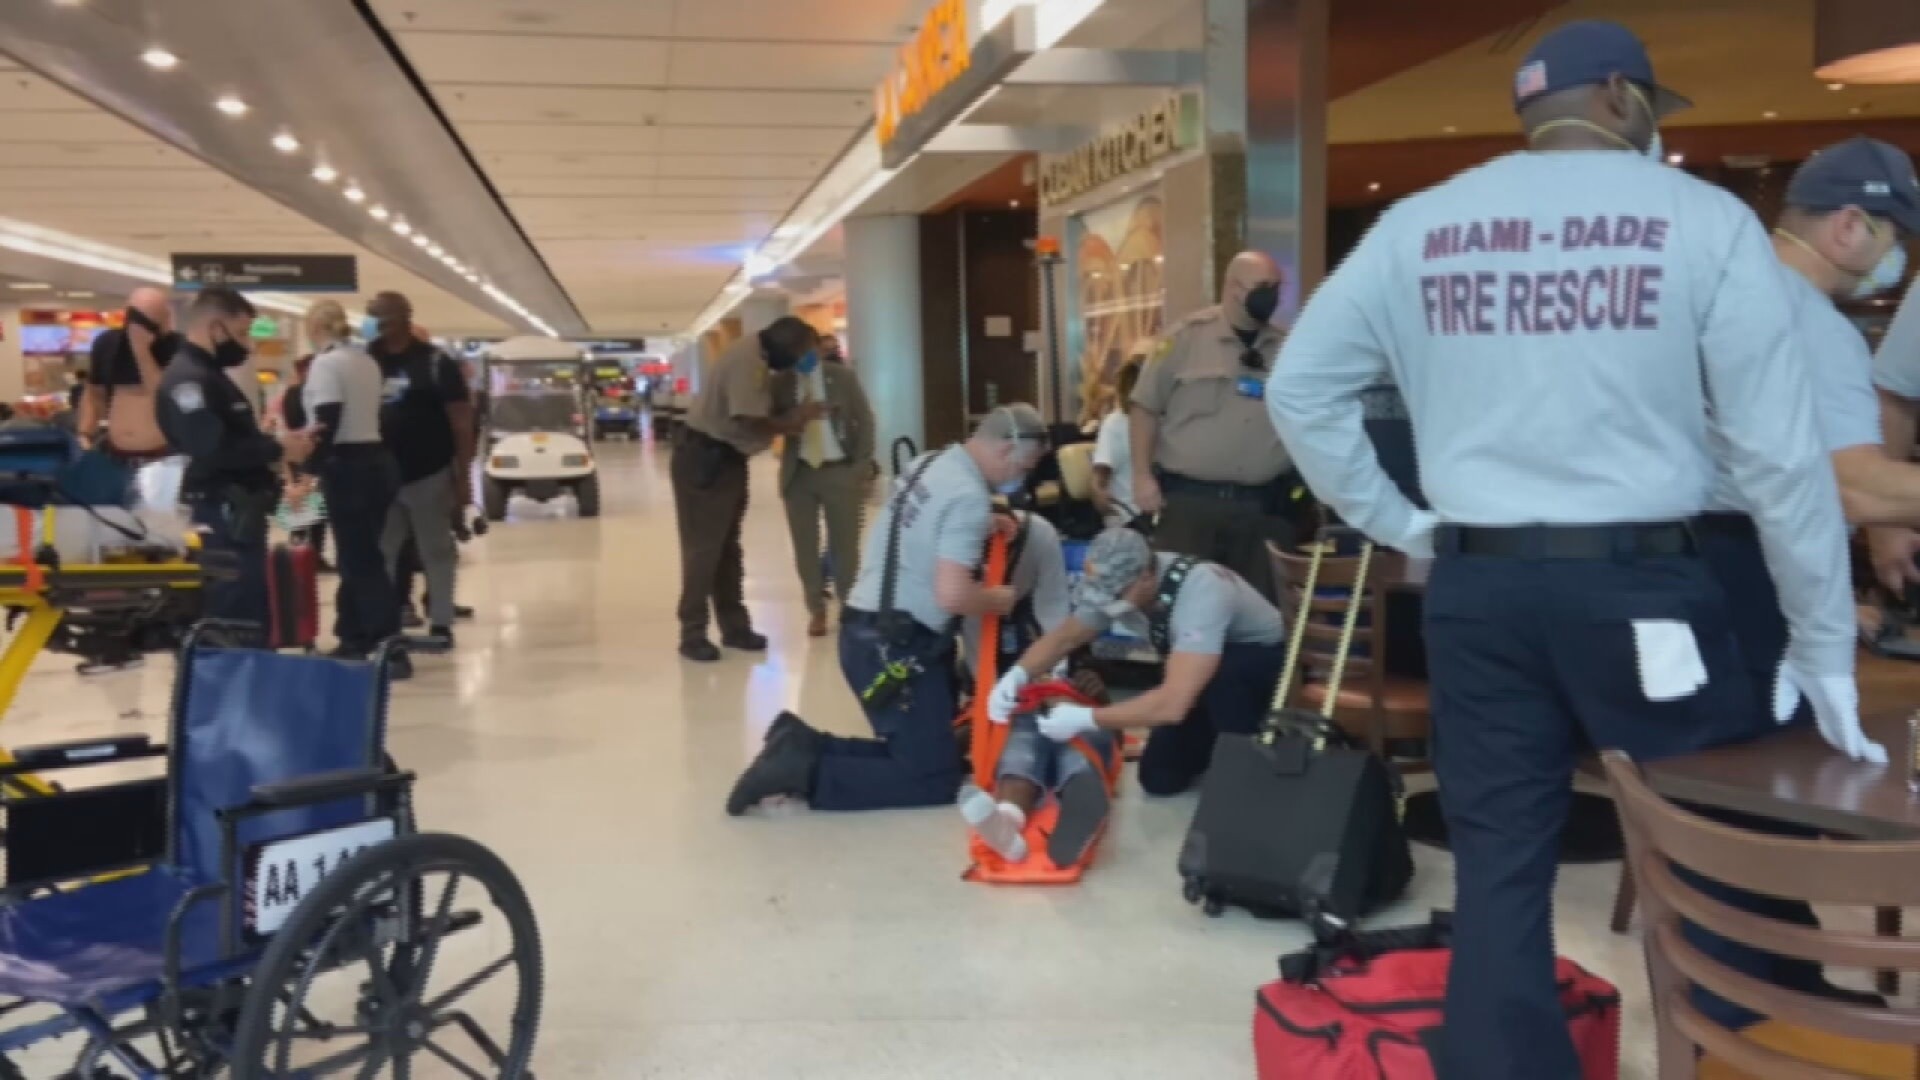 They reinforce security at Miami-Dade airport in the face of passenger rebellion